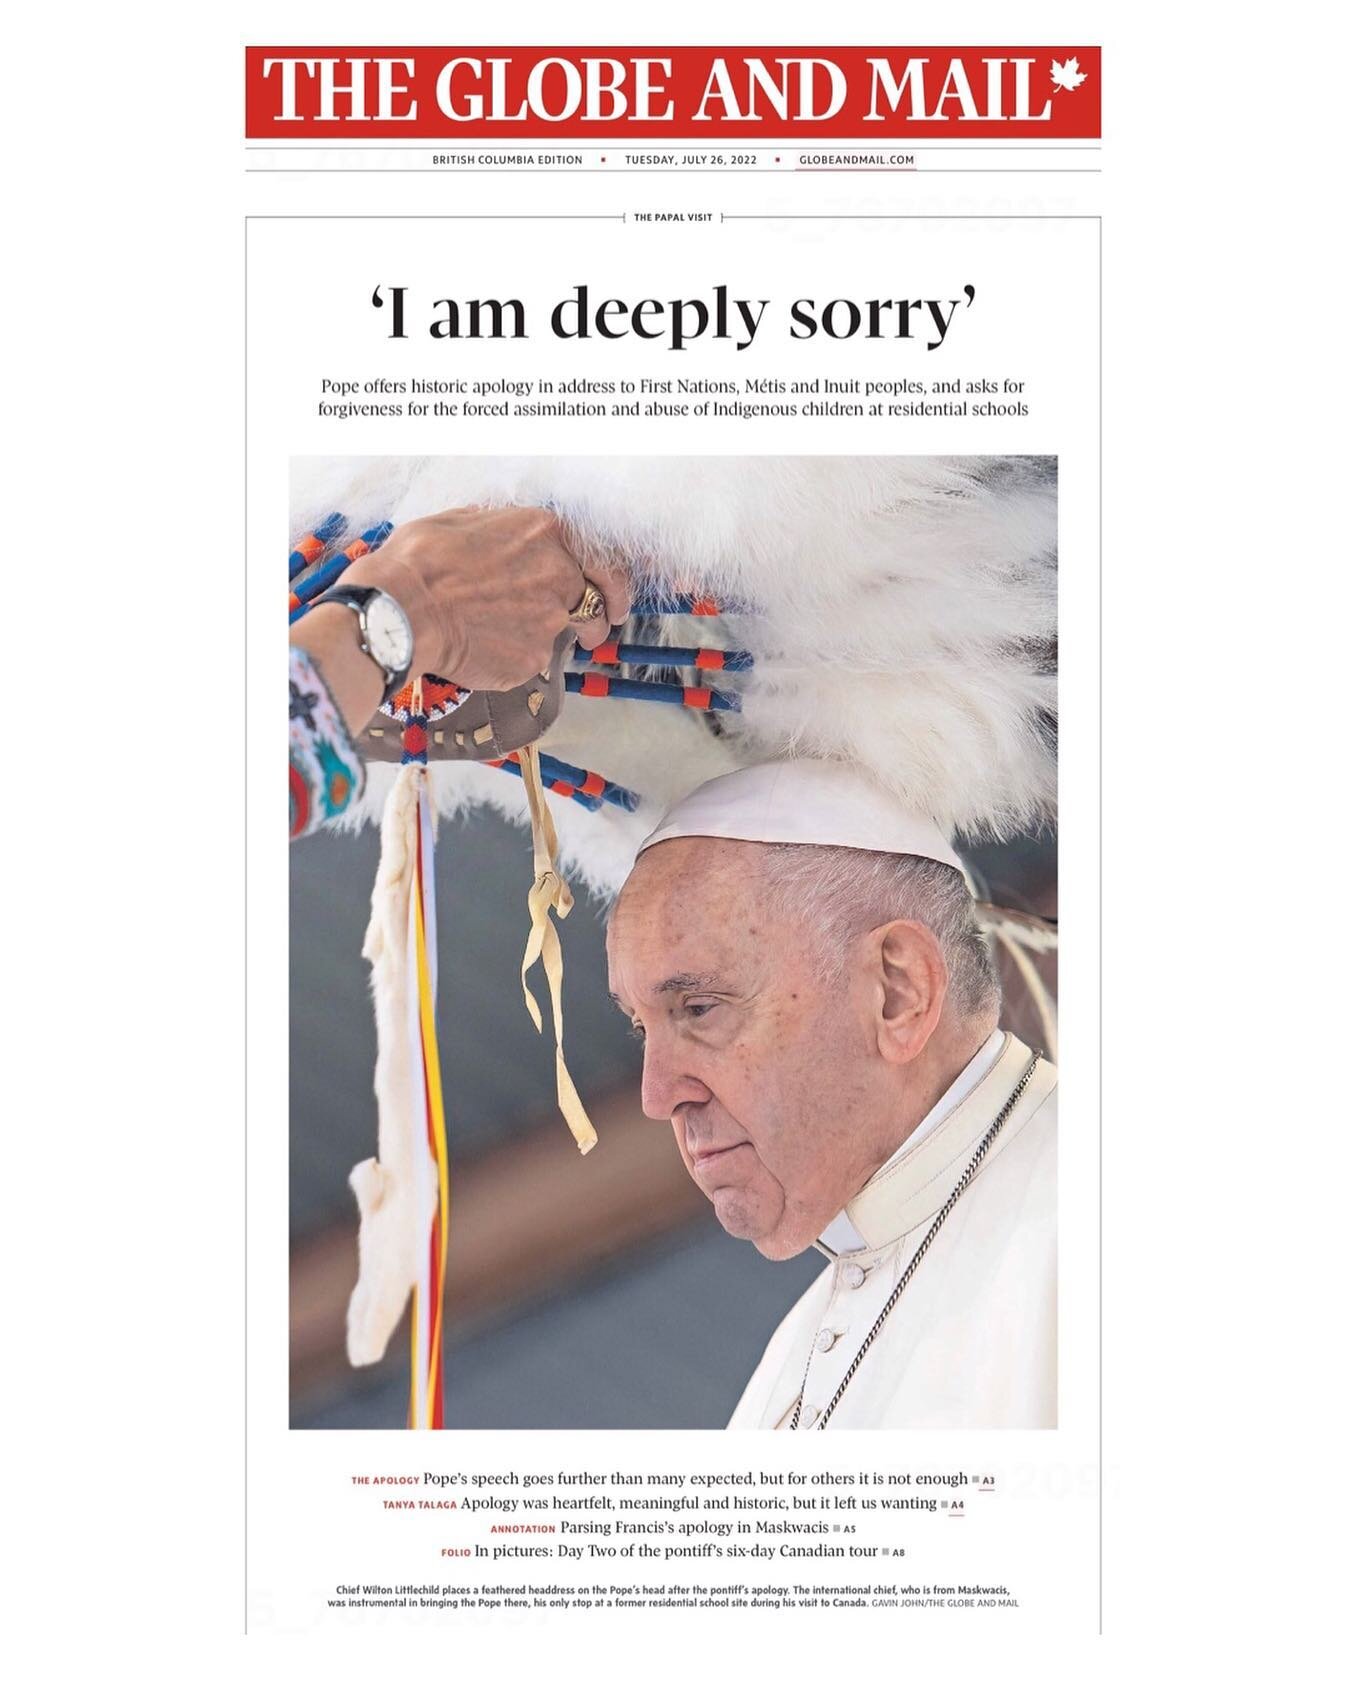 A historic photo by @gjohnjournalism of Chief Wilton Littlechild placing a feathered headdress on the Pope after the pontiff&rsquo;s apology at a former residential school site. Gavin was a mentee in our program last year. He is a proud member of the